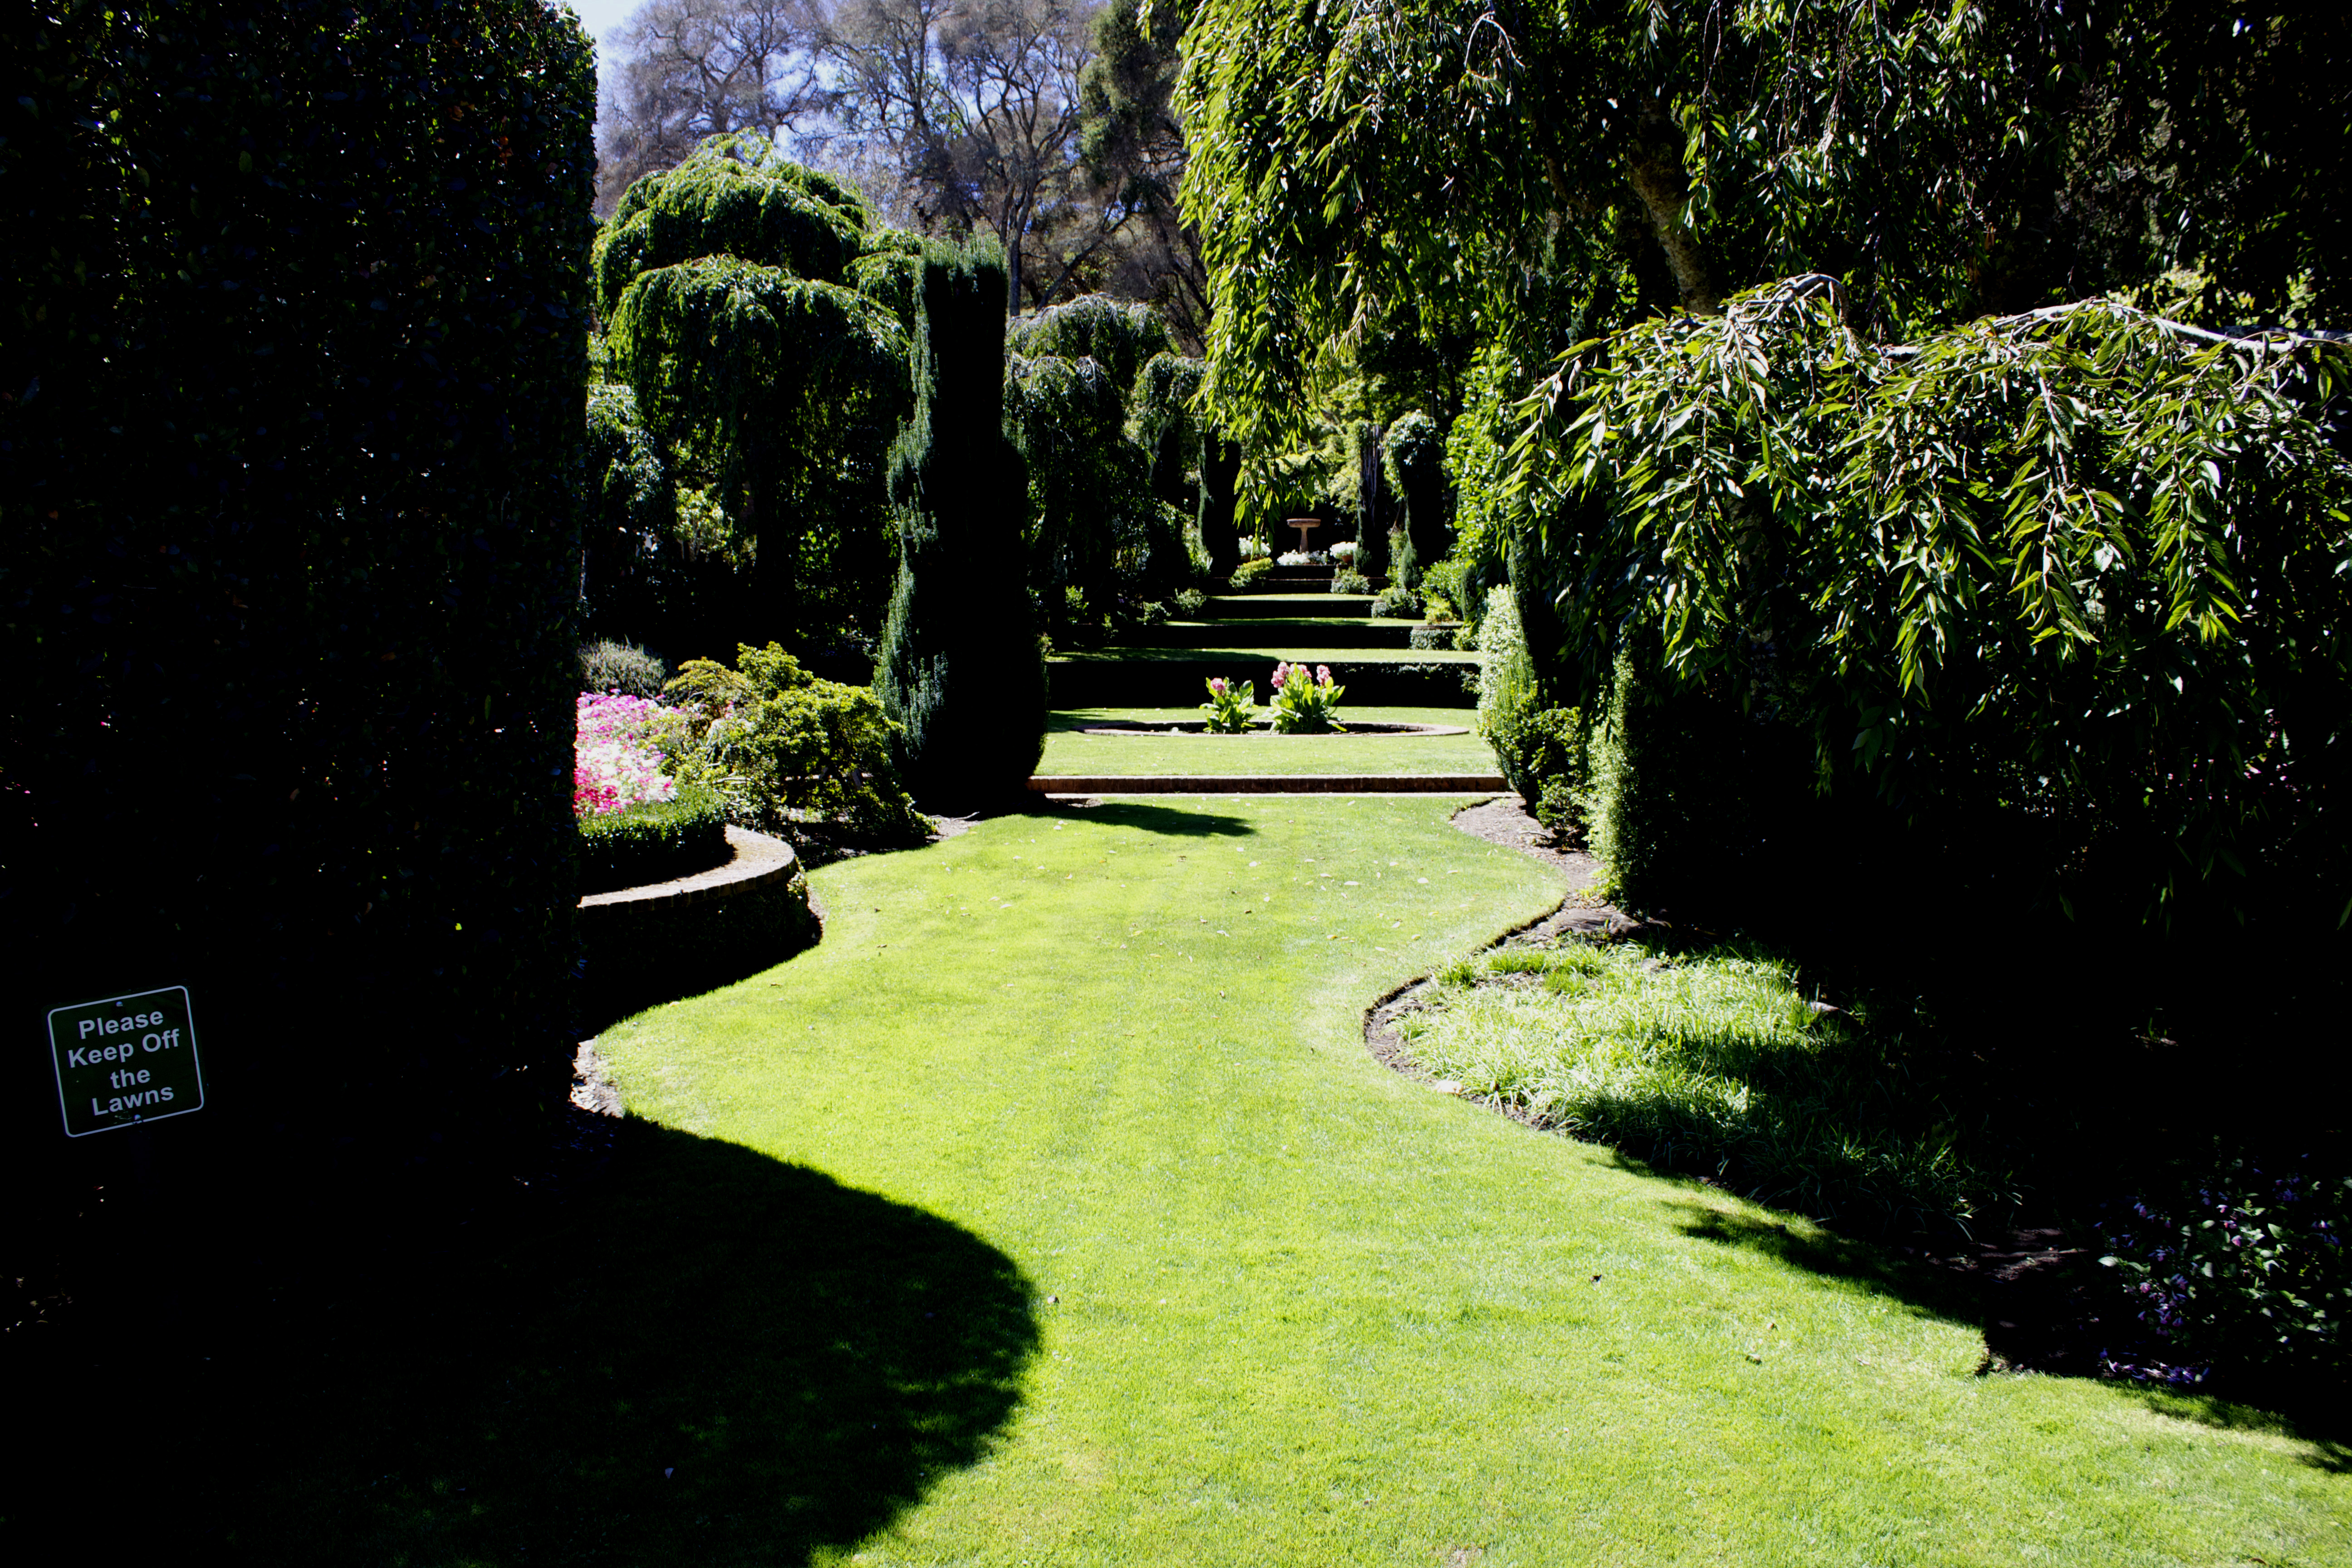 The lawn at Filoli Gardens. Notice the sign "Keep off the Grass".